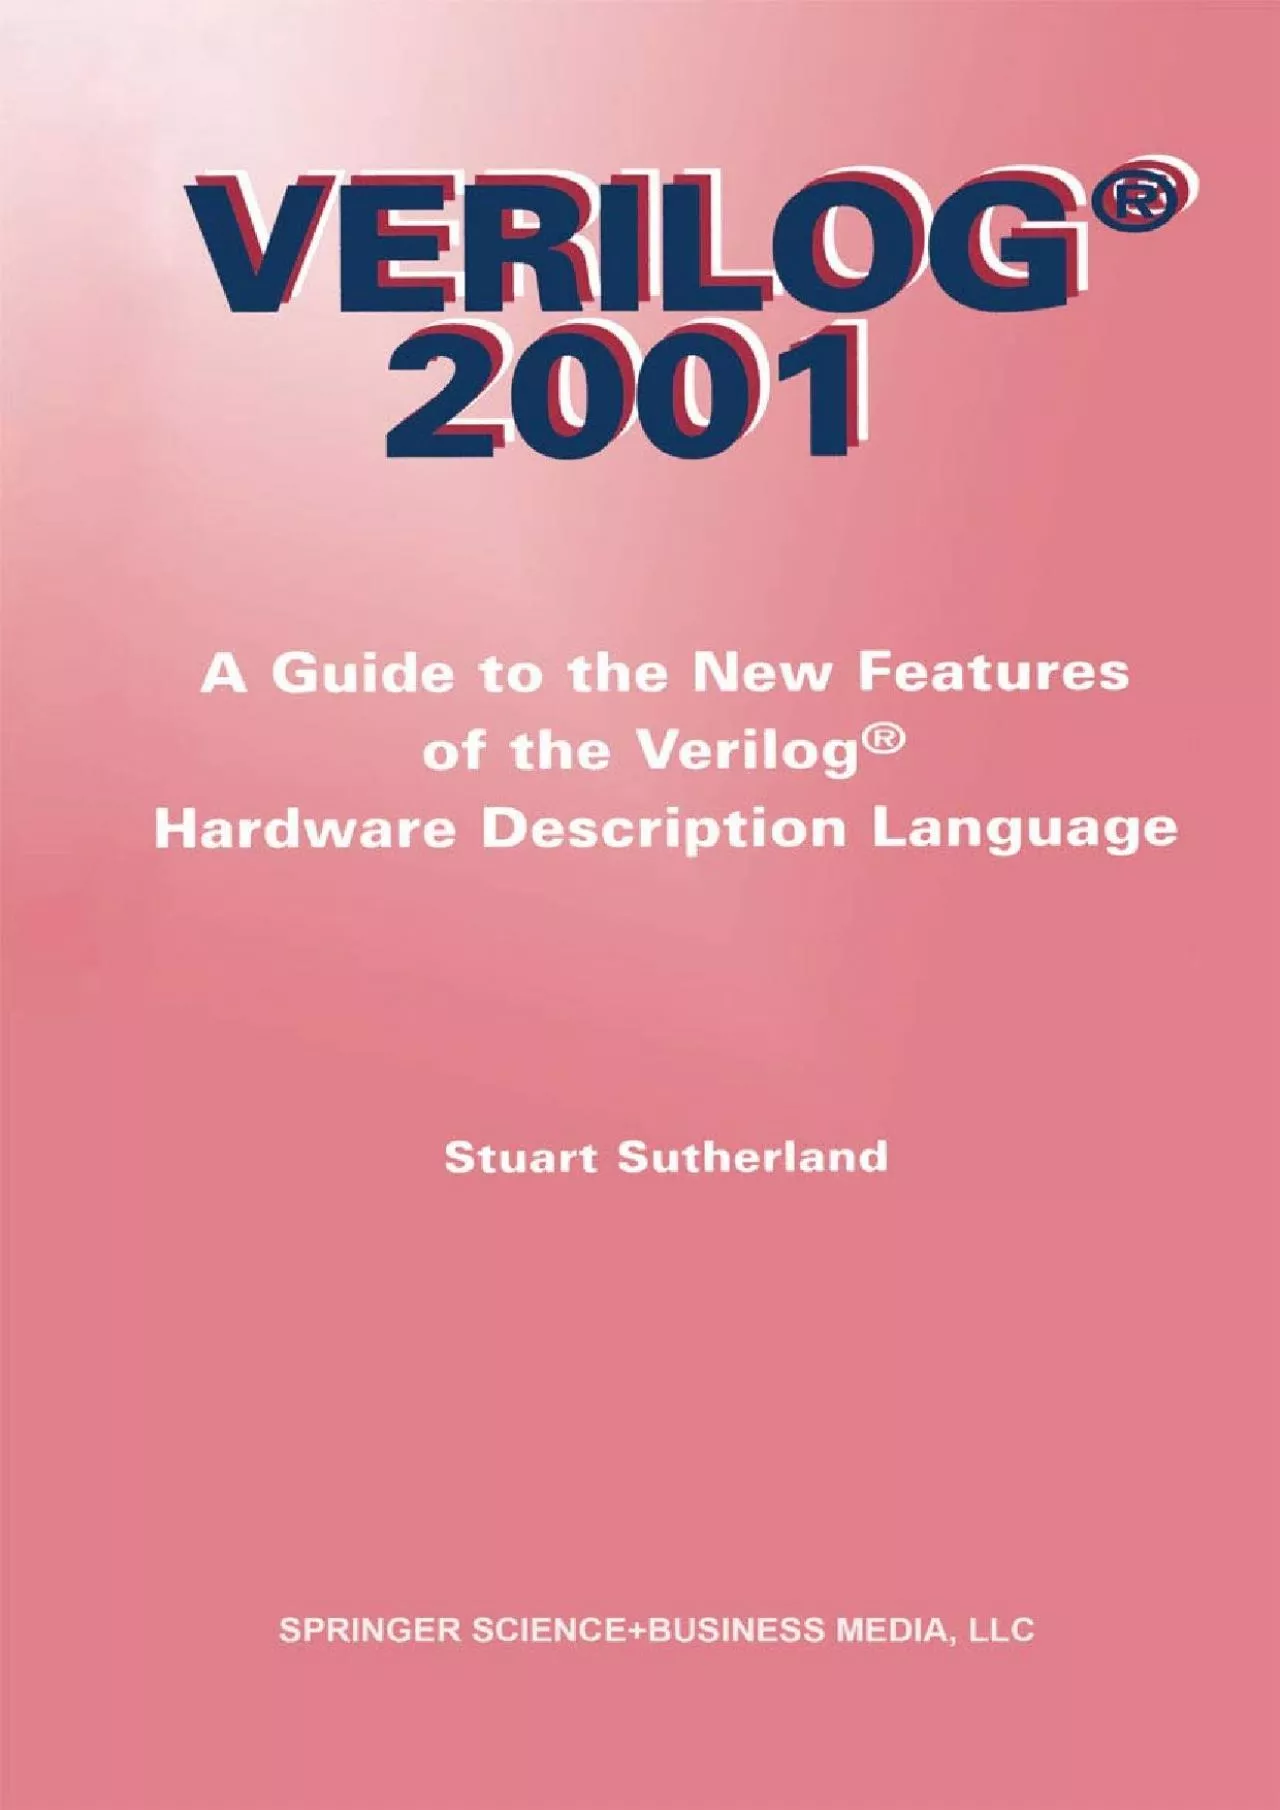 [READING BOOK]-Verilog — 2001: A Guide to the New Features of the Verilog® Hardware